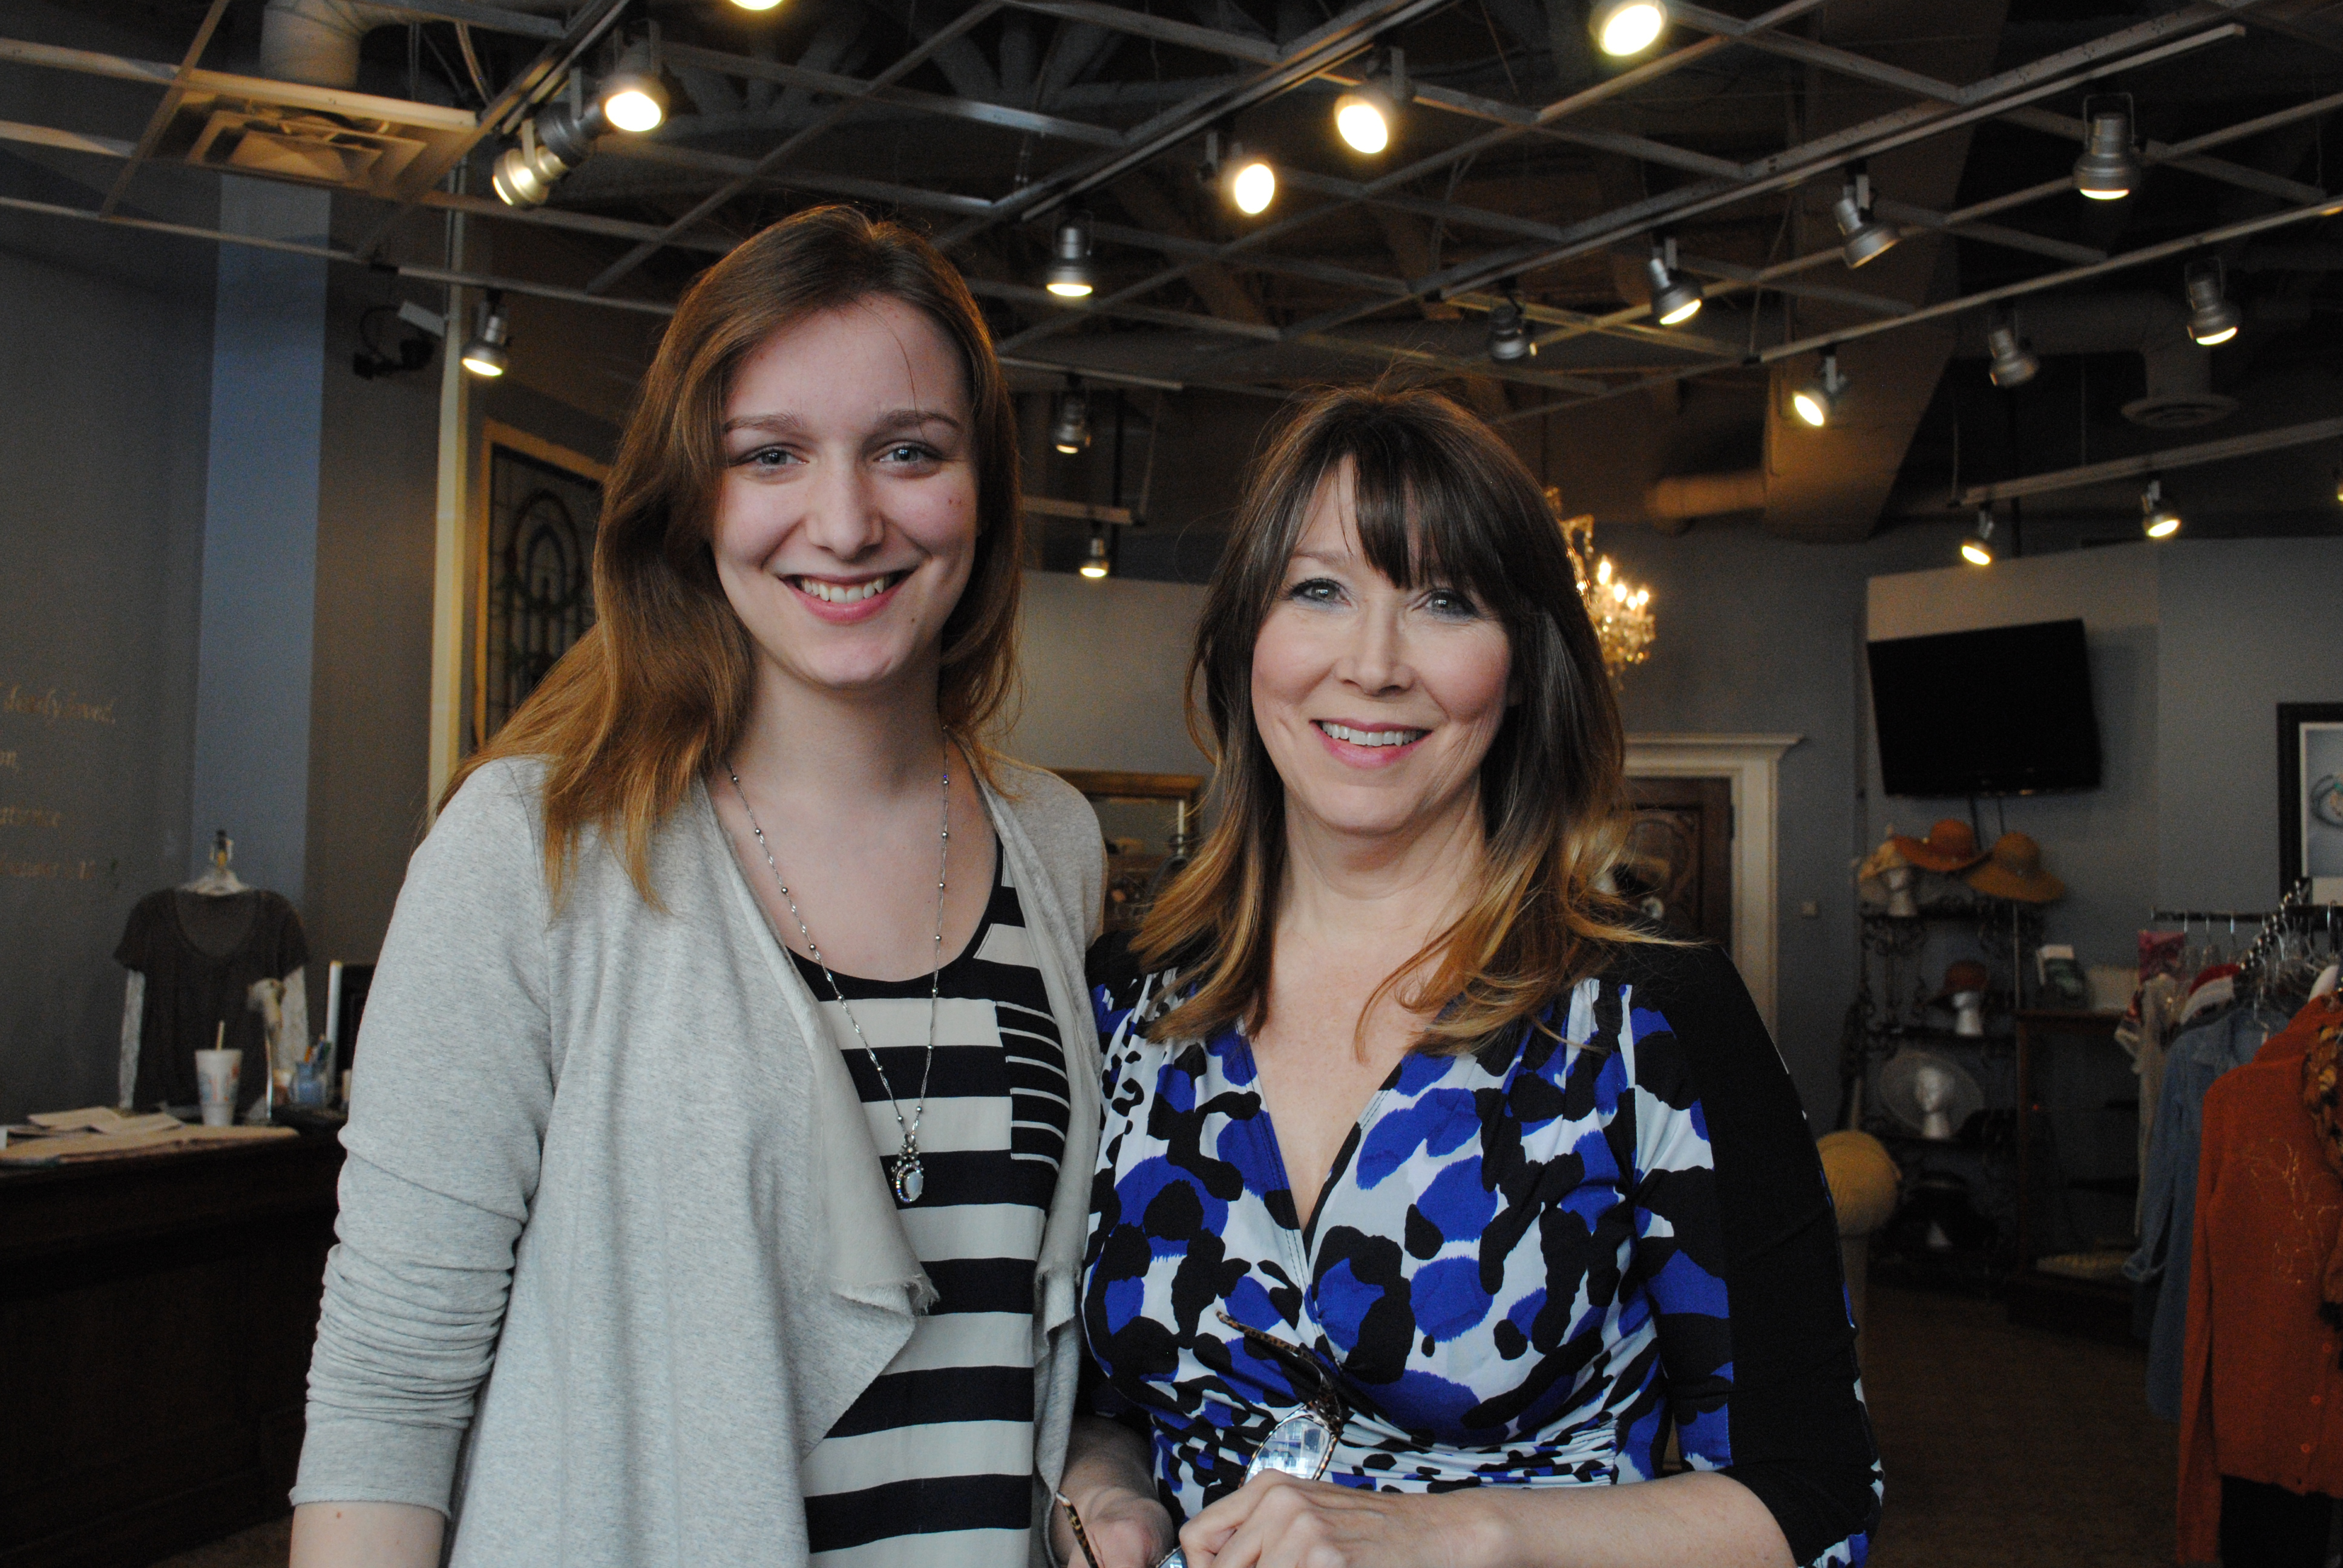 Mary & Martha’s Exceedingly Chic Boutique manager Lillian Bernard, left, and owner Laura Shattuck plan to relocate their boutique to Zionsville later this spring. (Staff photo)